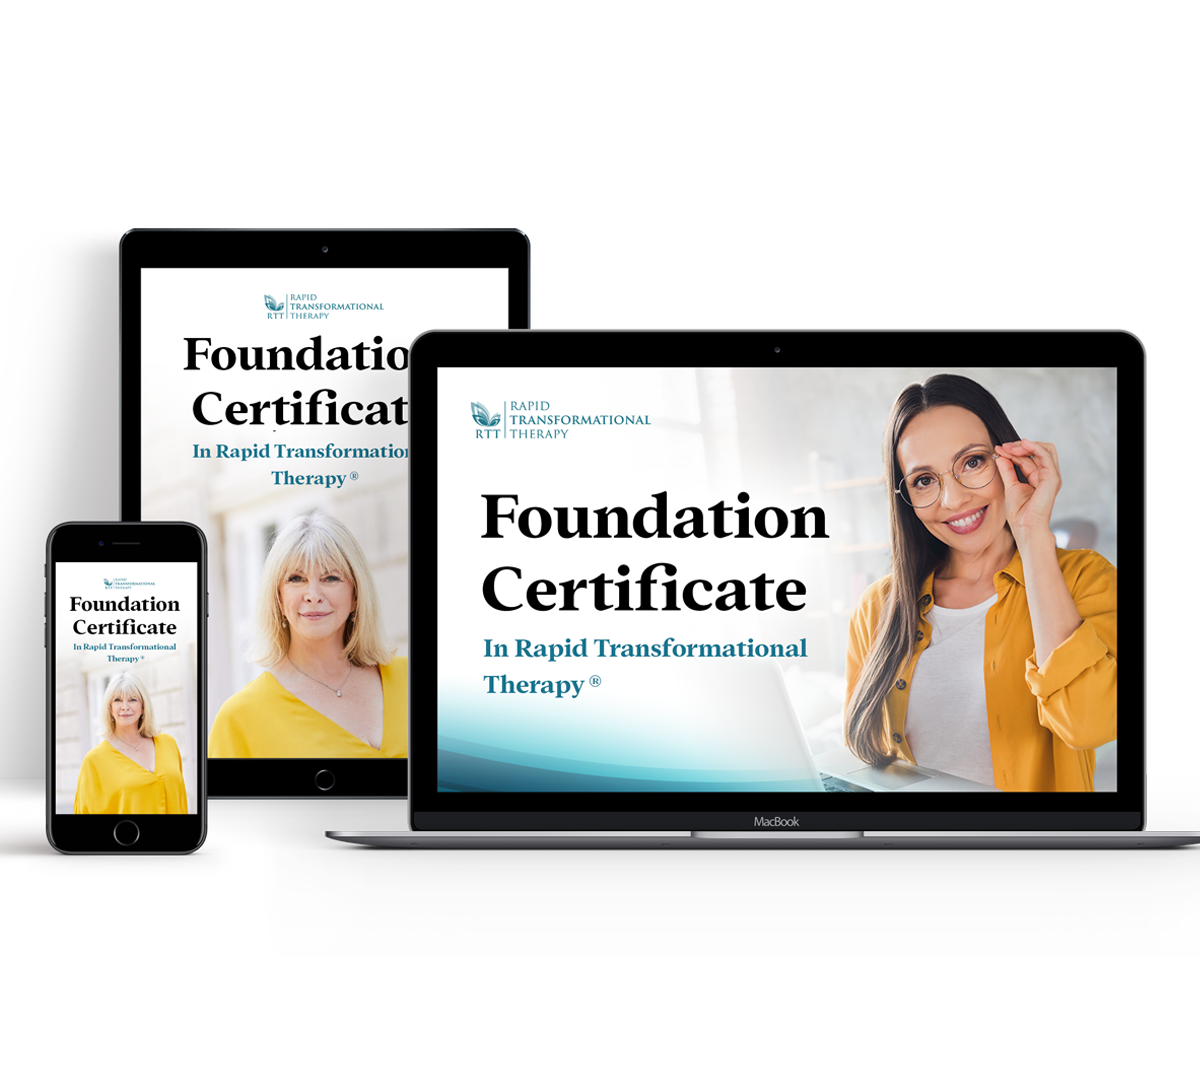 Foundation Certificate in Rapid Transformational Therapy